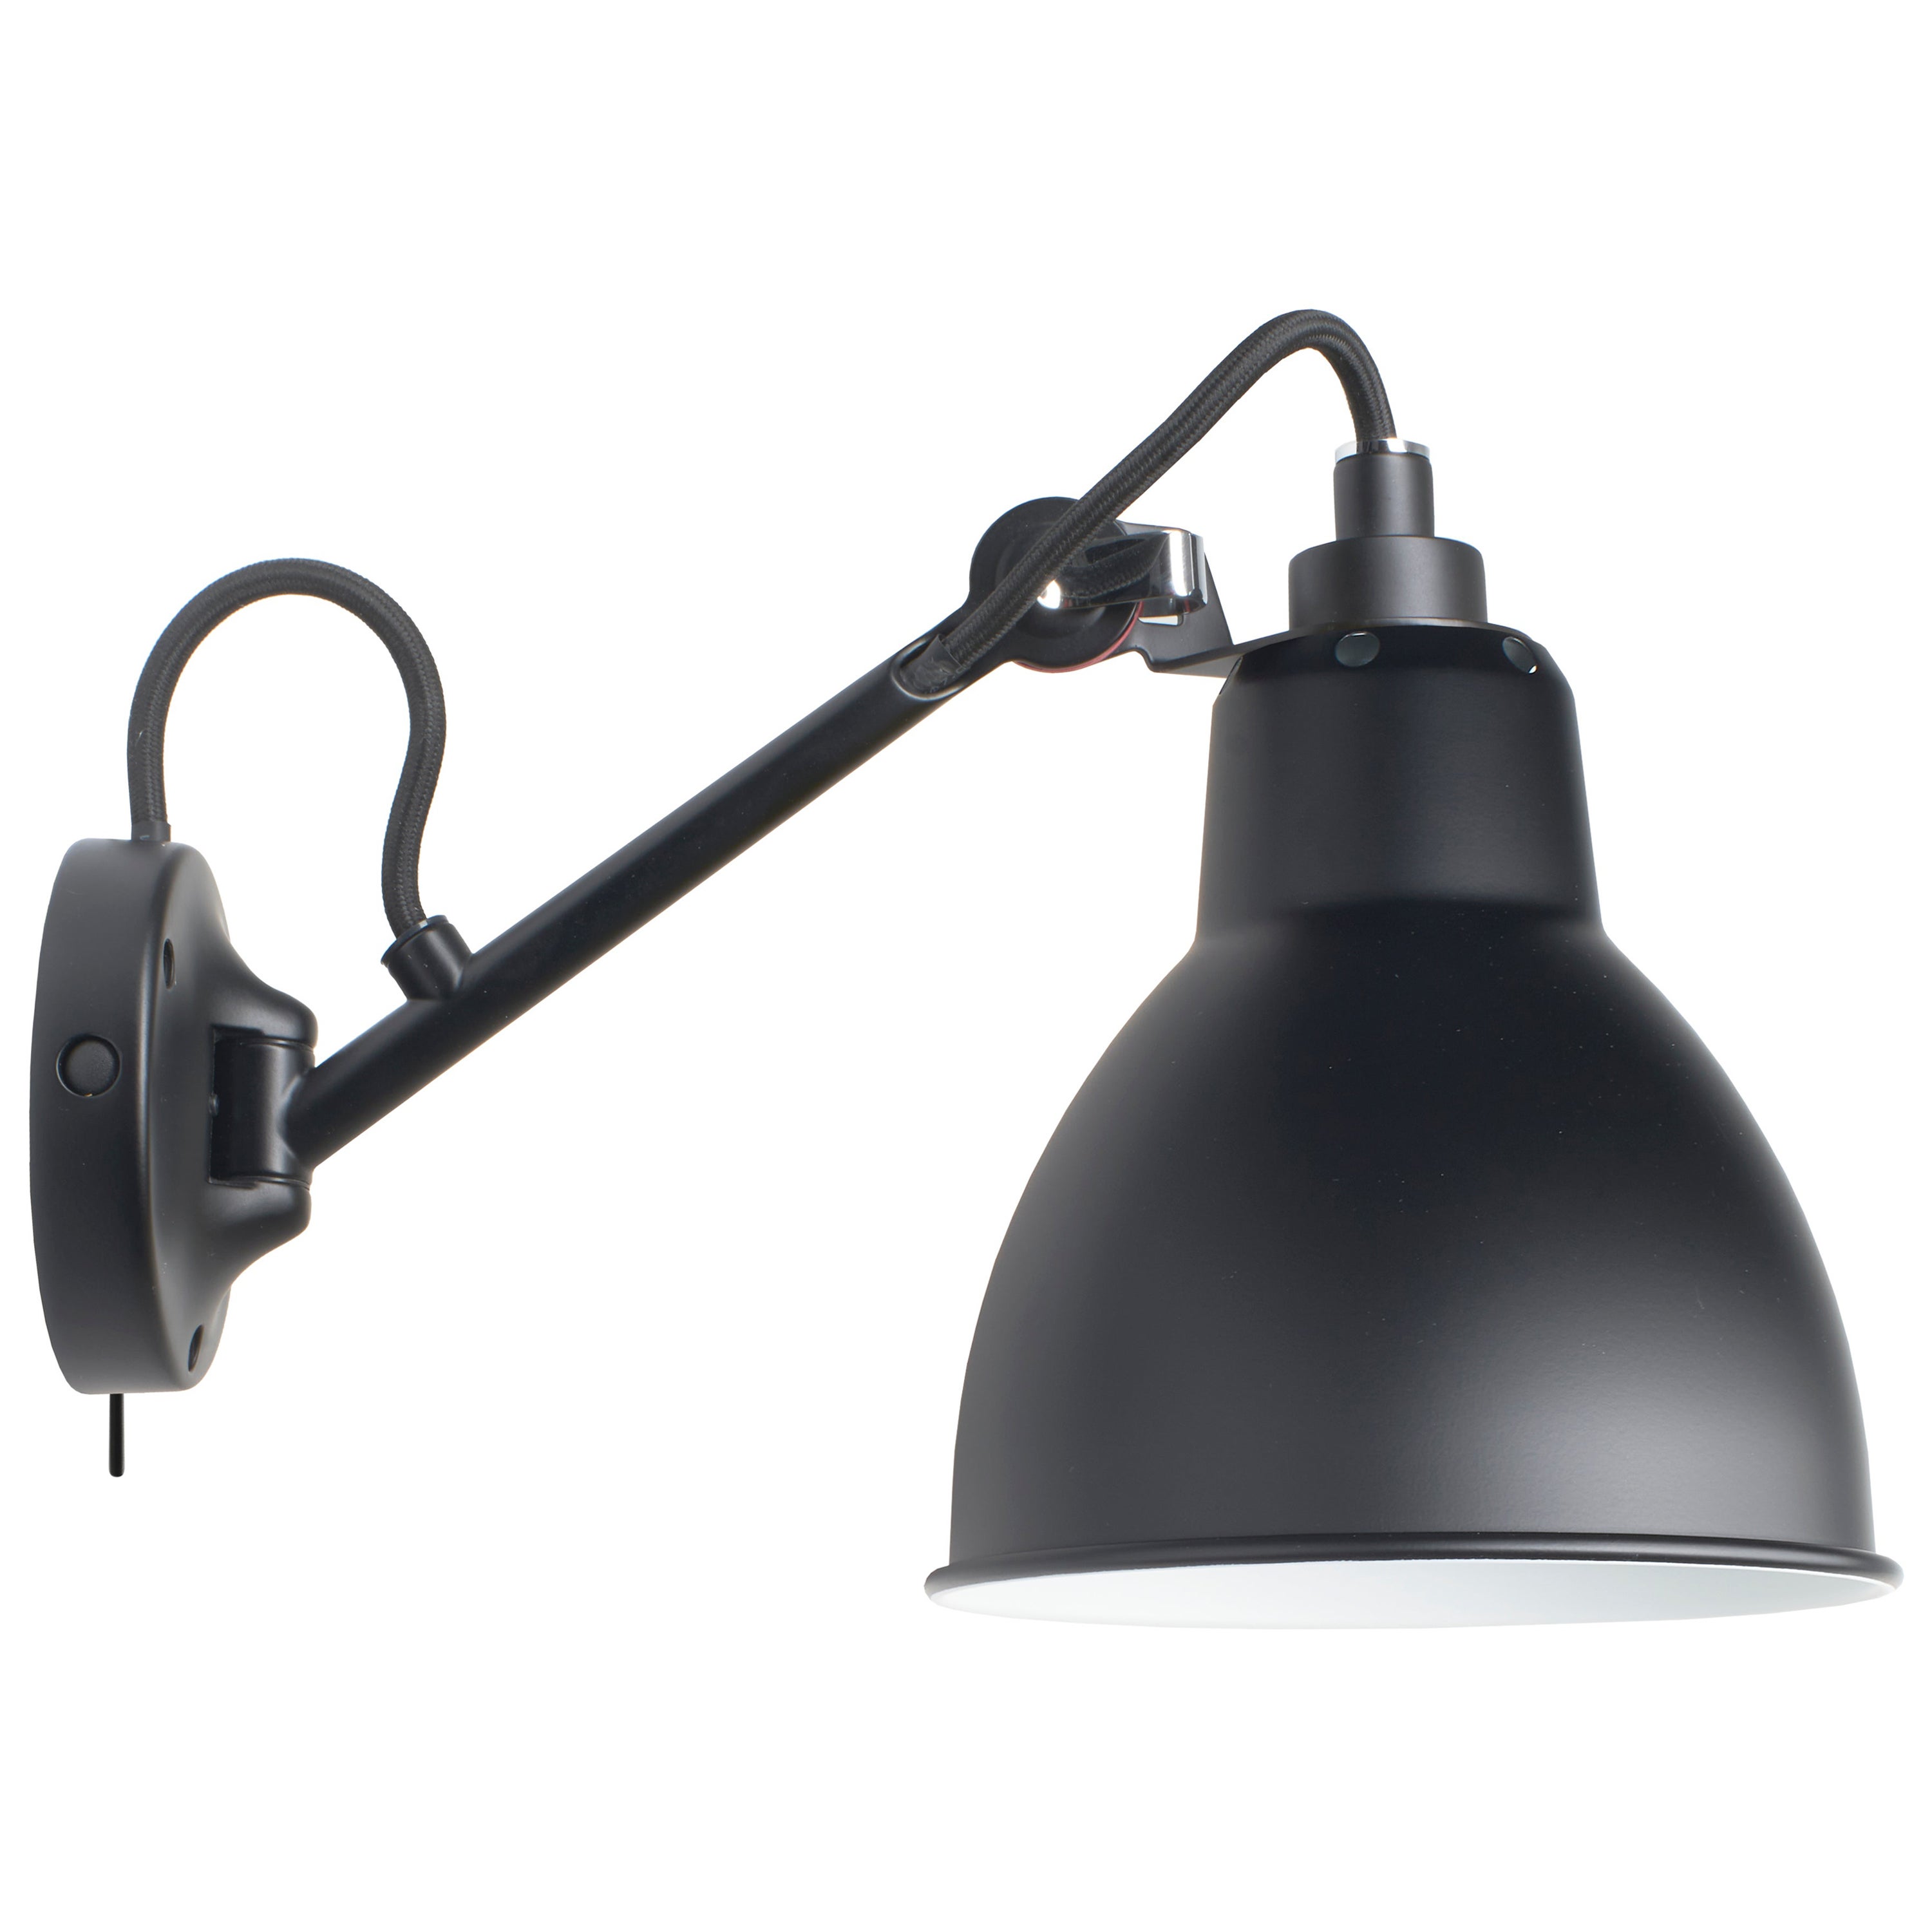 DCW Editions La Lampe Gras N°104 SW Wall Lamp in Black Arm and Black Shade